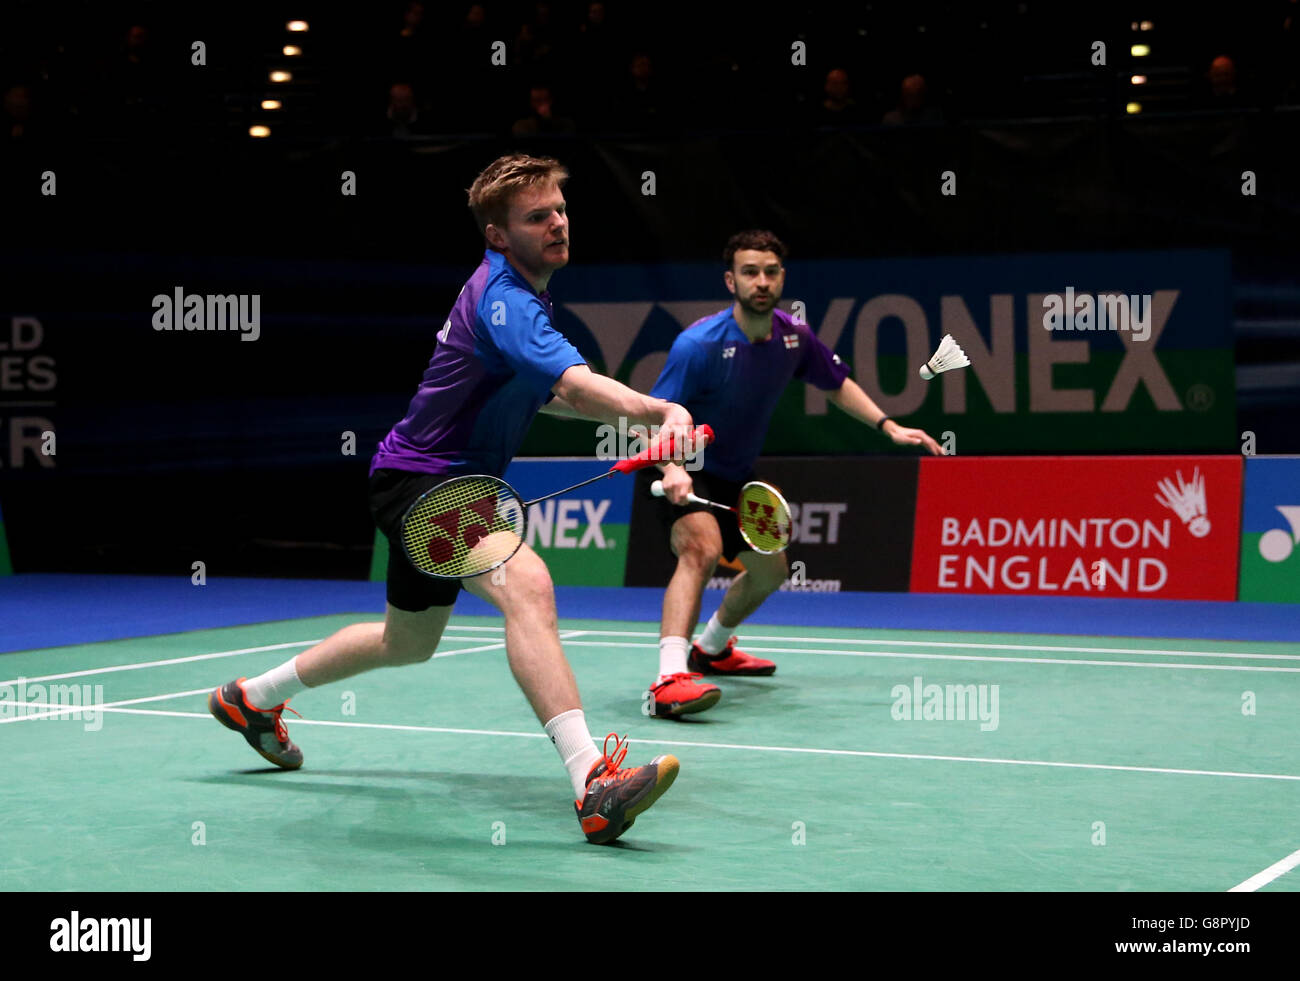 Marcus Ellis (left) and Chris Langridge in action during their men's doubles match during day one of the YONEX All England Open Badminton Championships at the Barclaycard Arena, Birmingham. Stock Photo